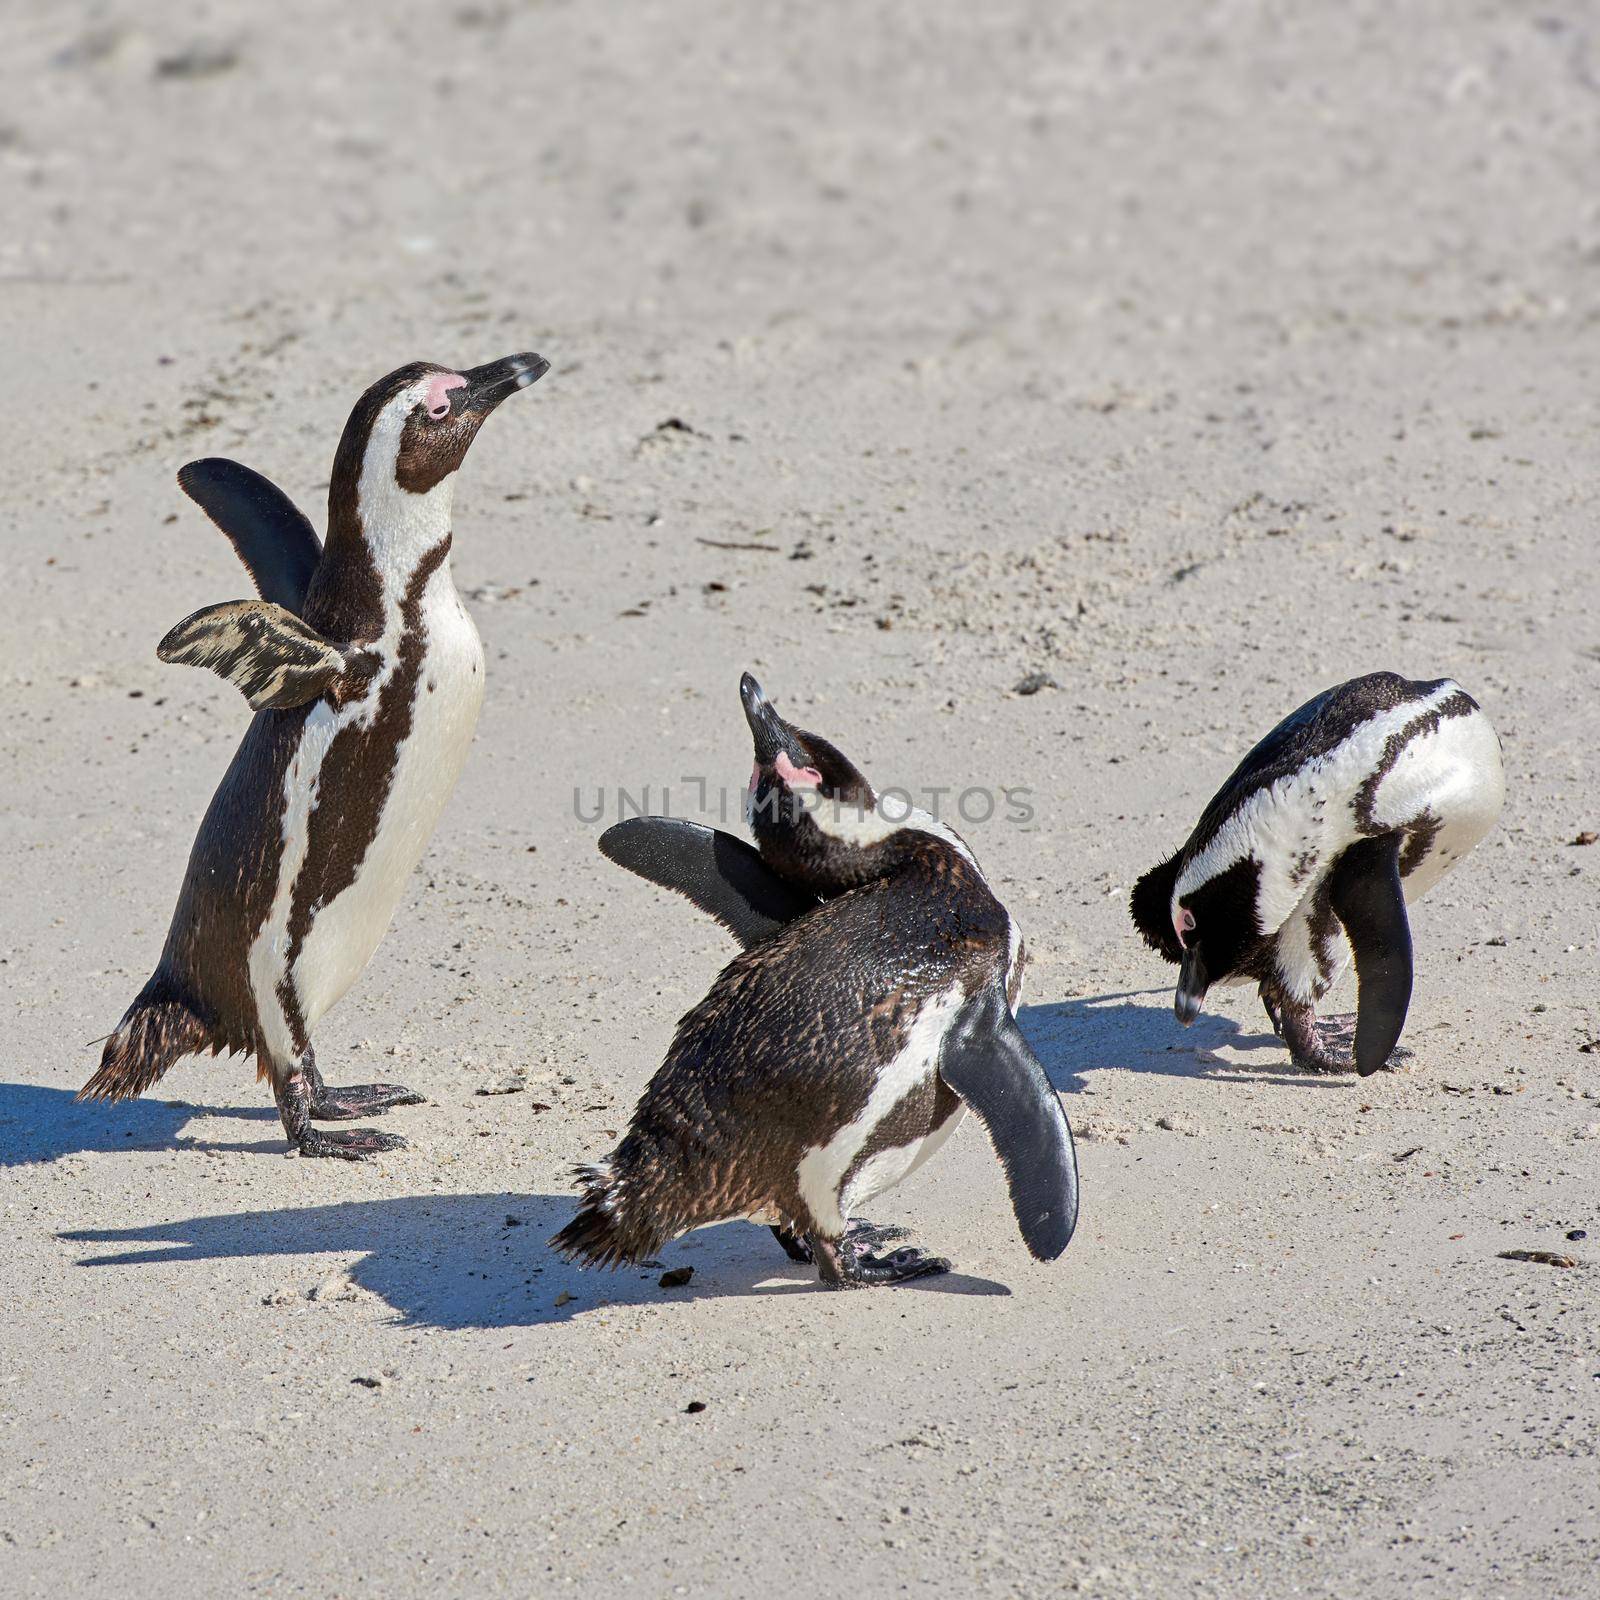 Penguins at Boulders Beach in South Africa. Birds playing and walking on the sand on a secluded and empty beach. Animals on a remote and secluded popular tourist seaside attraction in Cape Town.